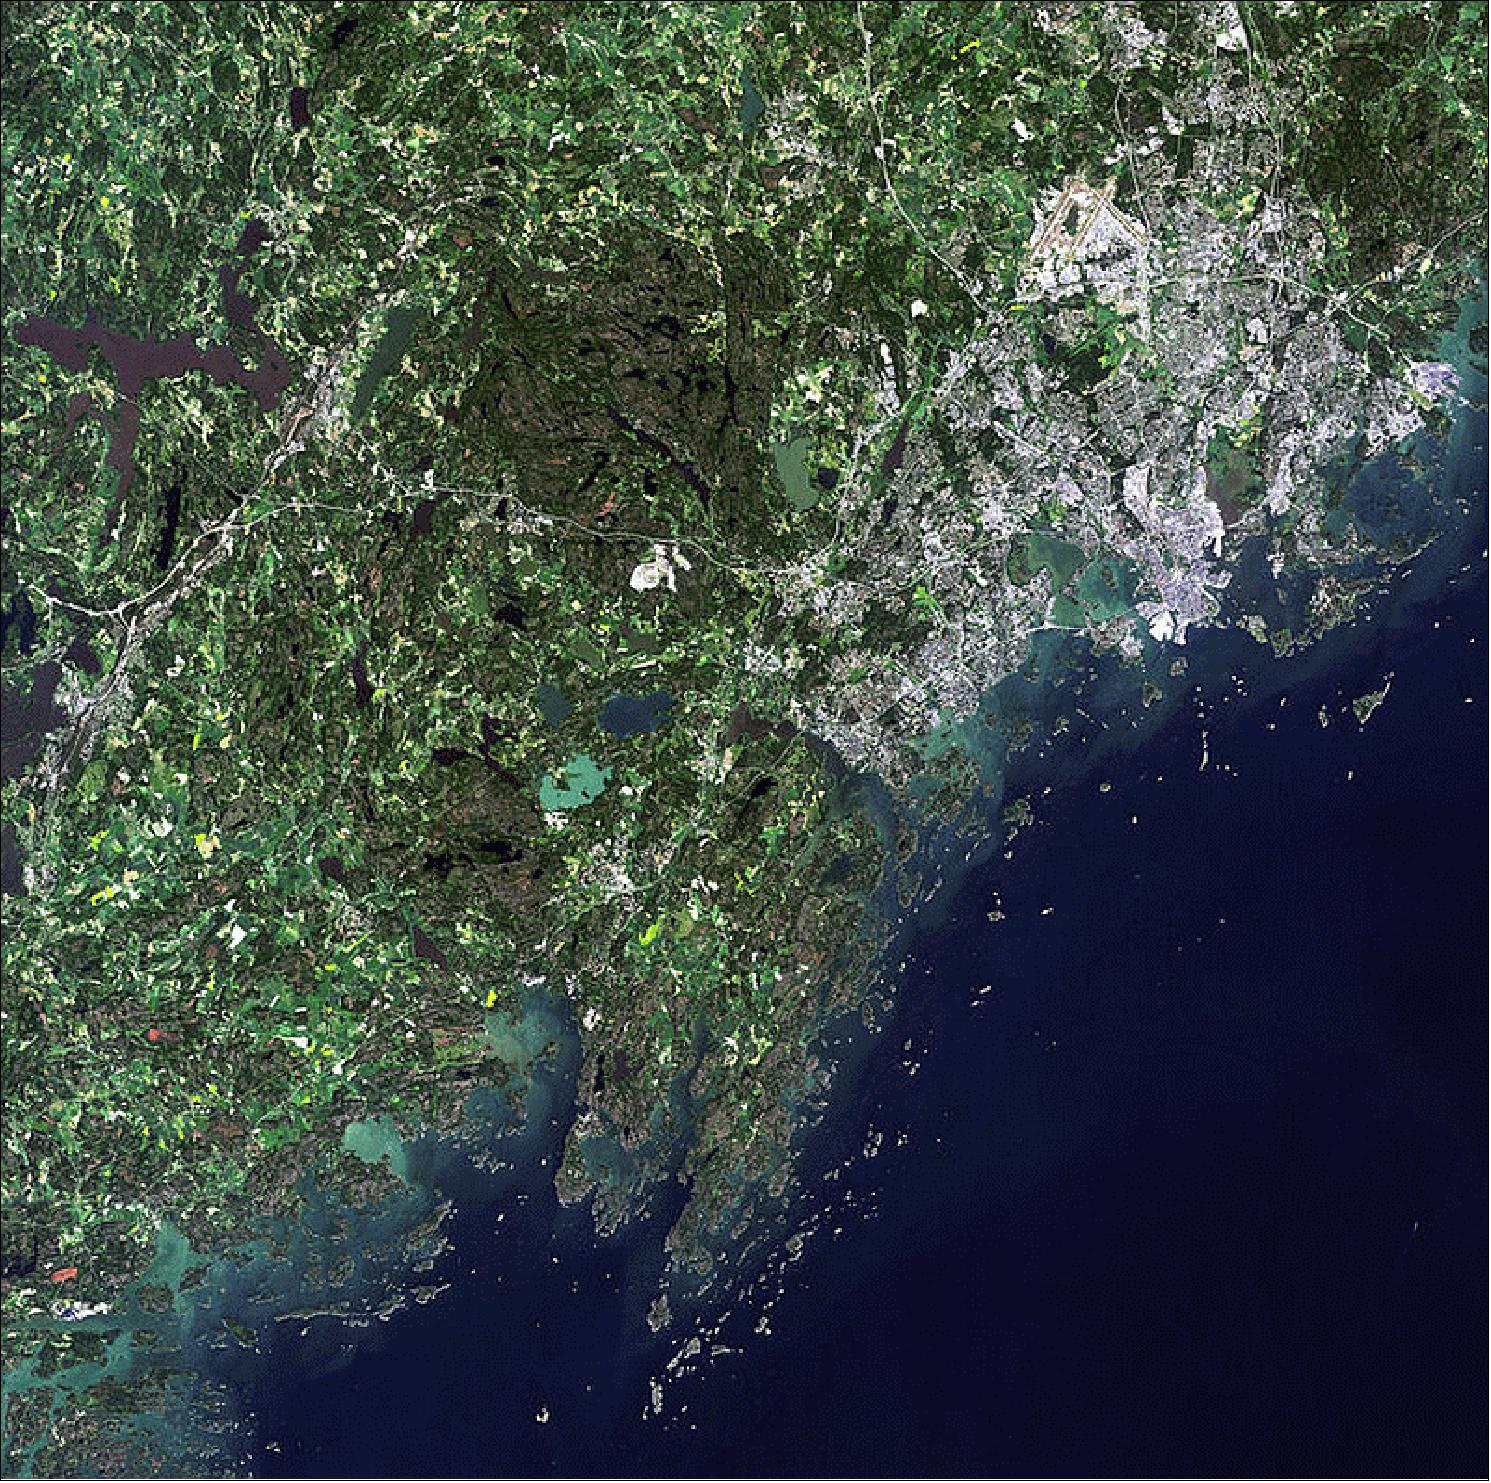 Figure 15: The AVNIR-2 instrument of ALOS captured this image of Finland’s capital and largest city, Helsinki (upper right), on the shores of the Gulf of Finland on June 28, 2009 (image credit: ESA's Earth from Space video program)